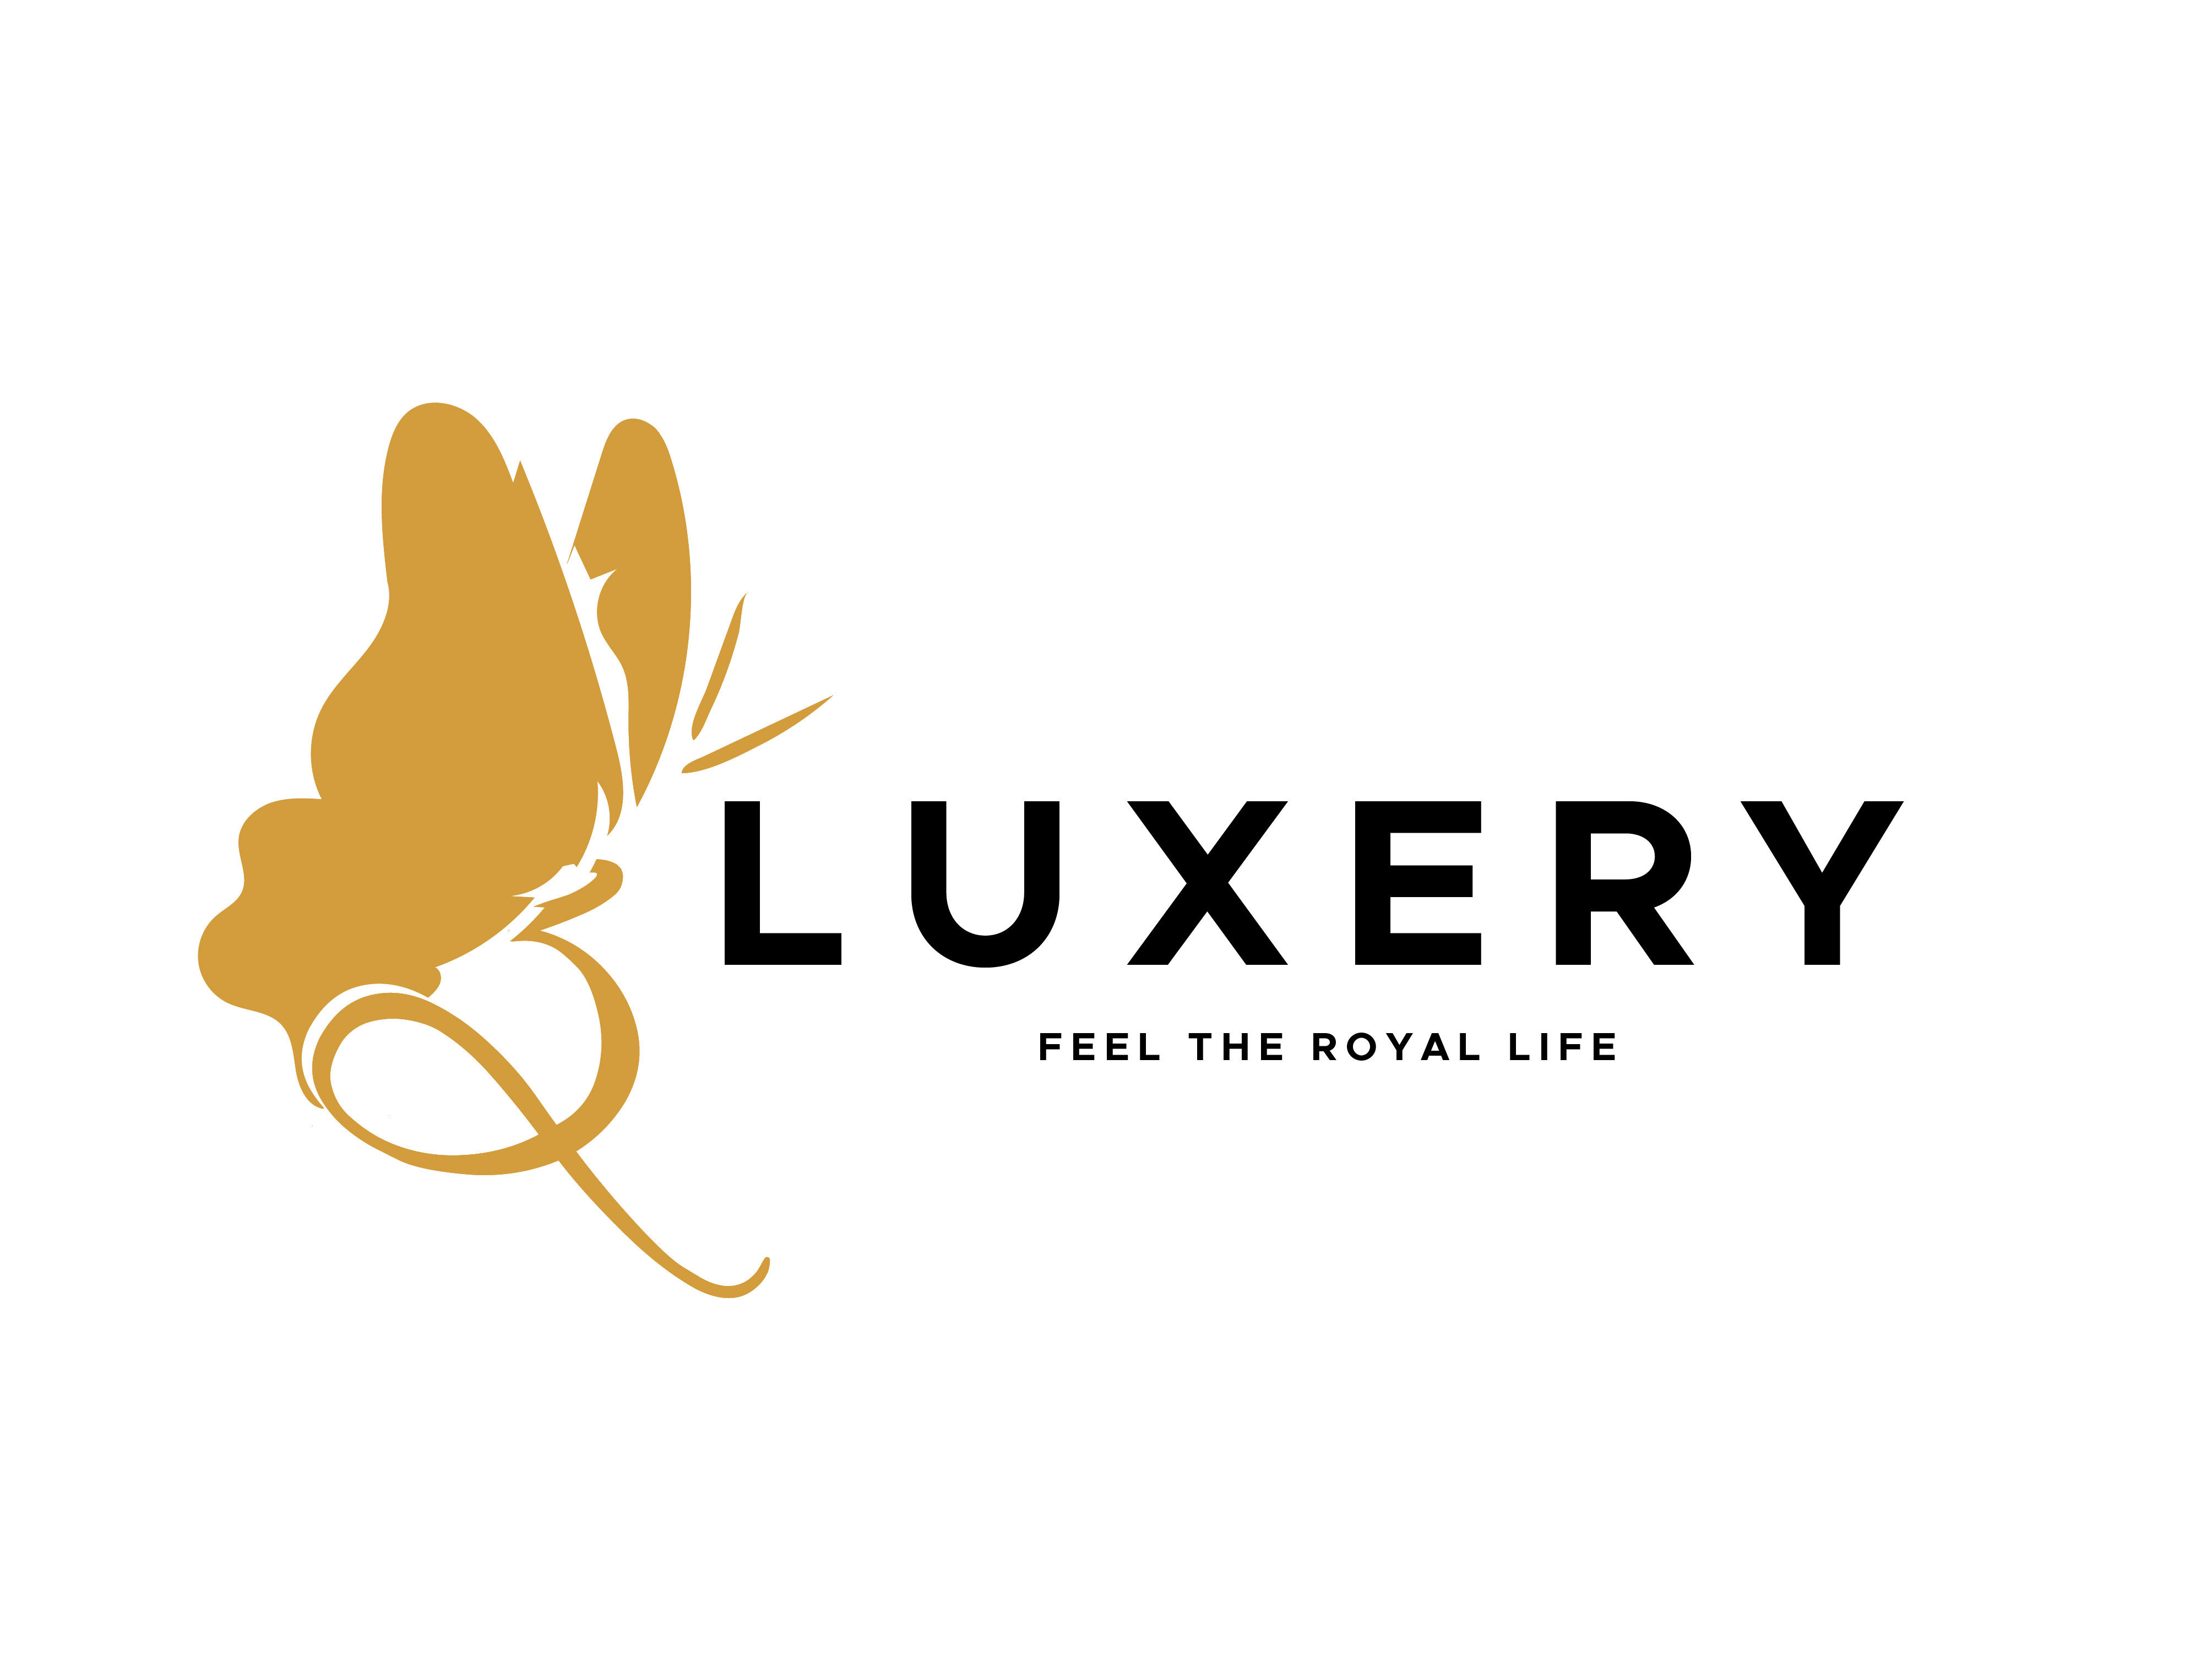 The logo for luxury feel the royal life.